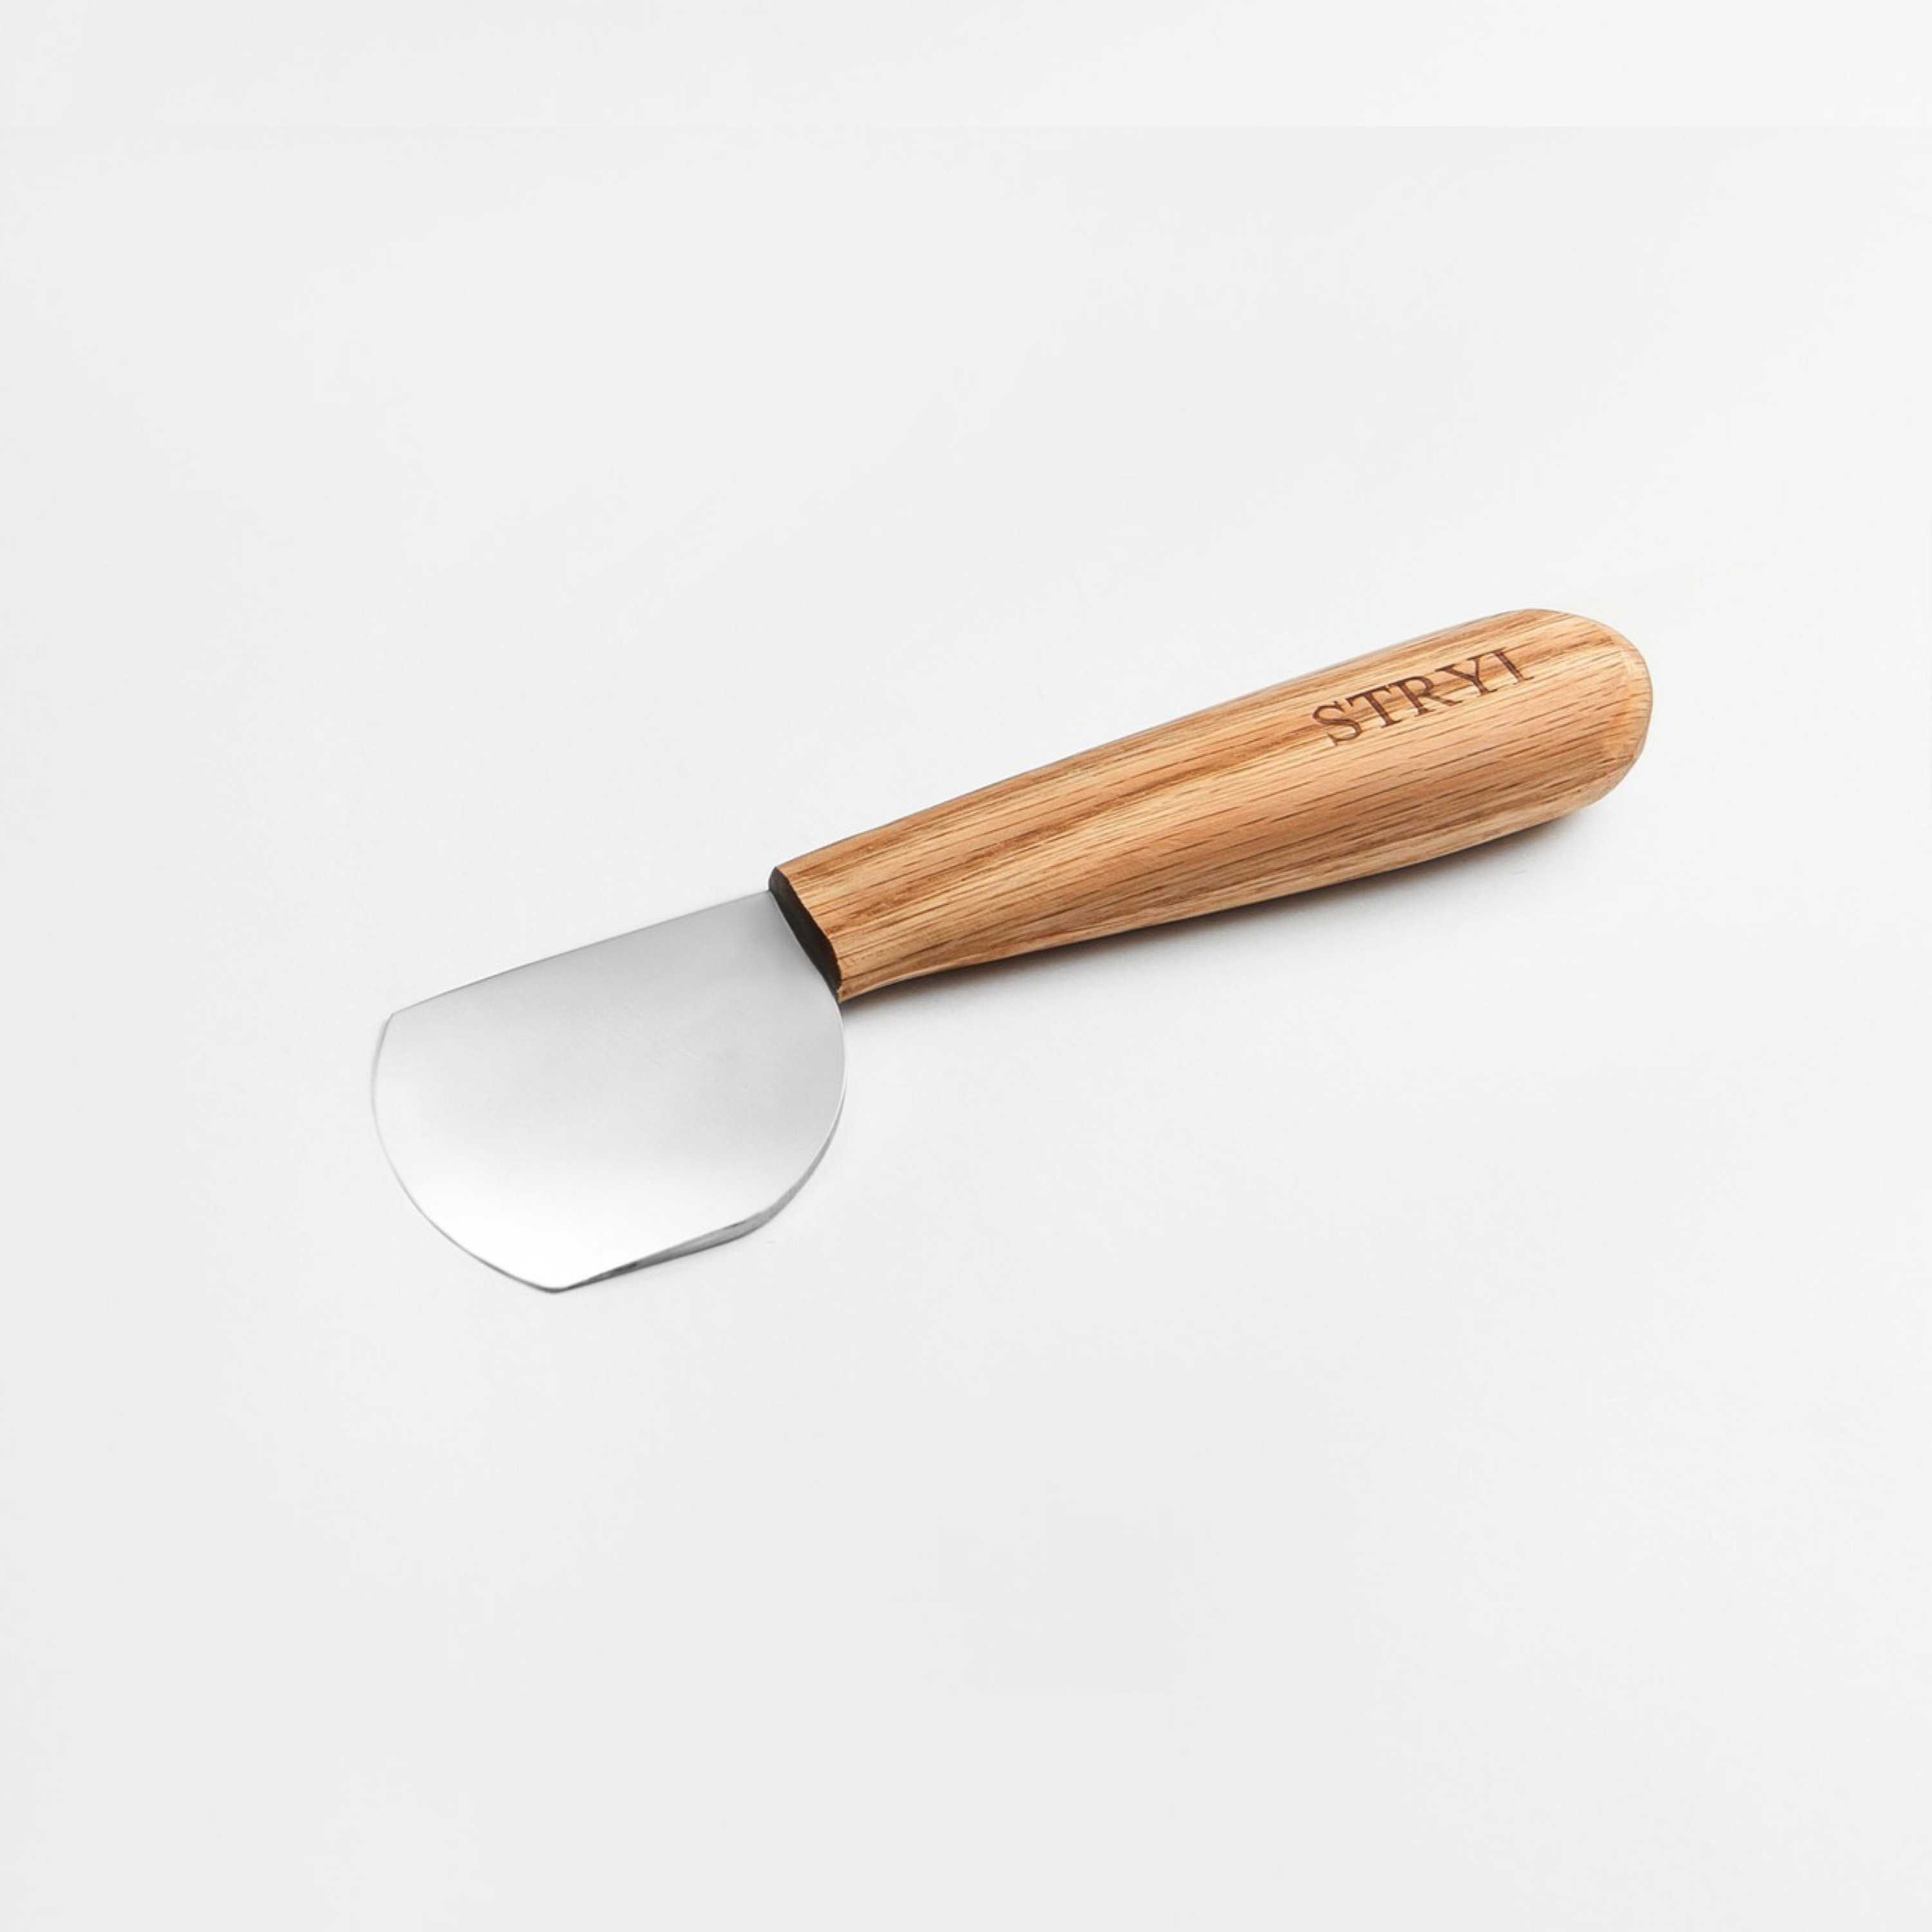 Rounded-Bevel Skiving Knife For Leather, Leather Carving Knife